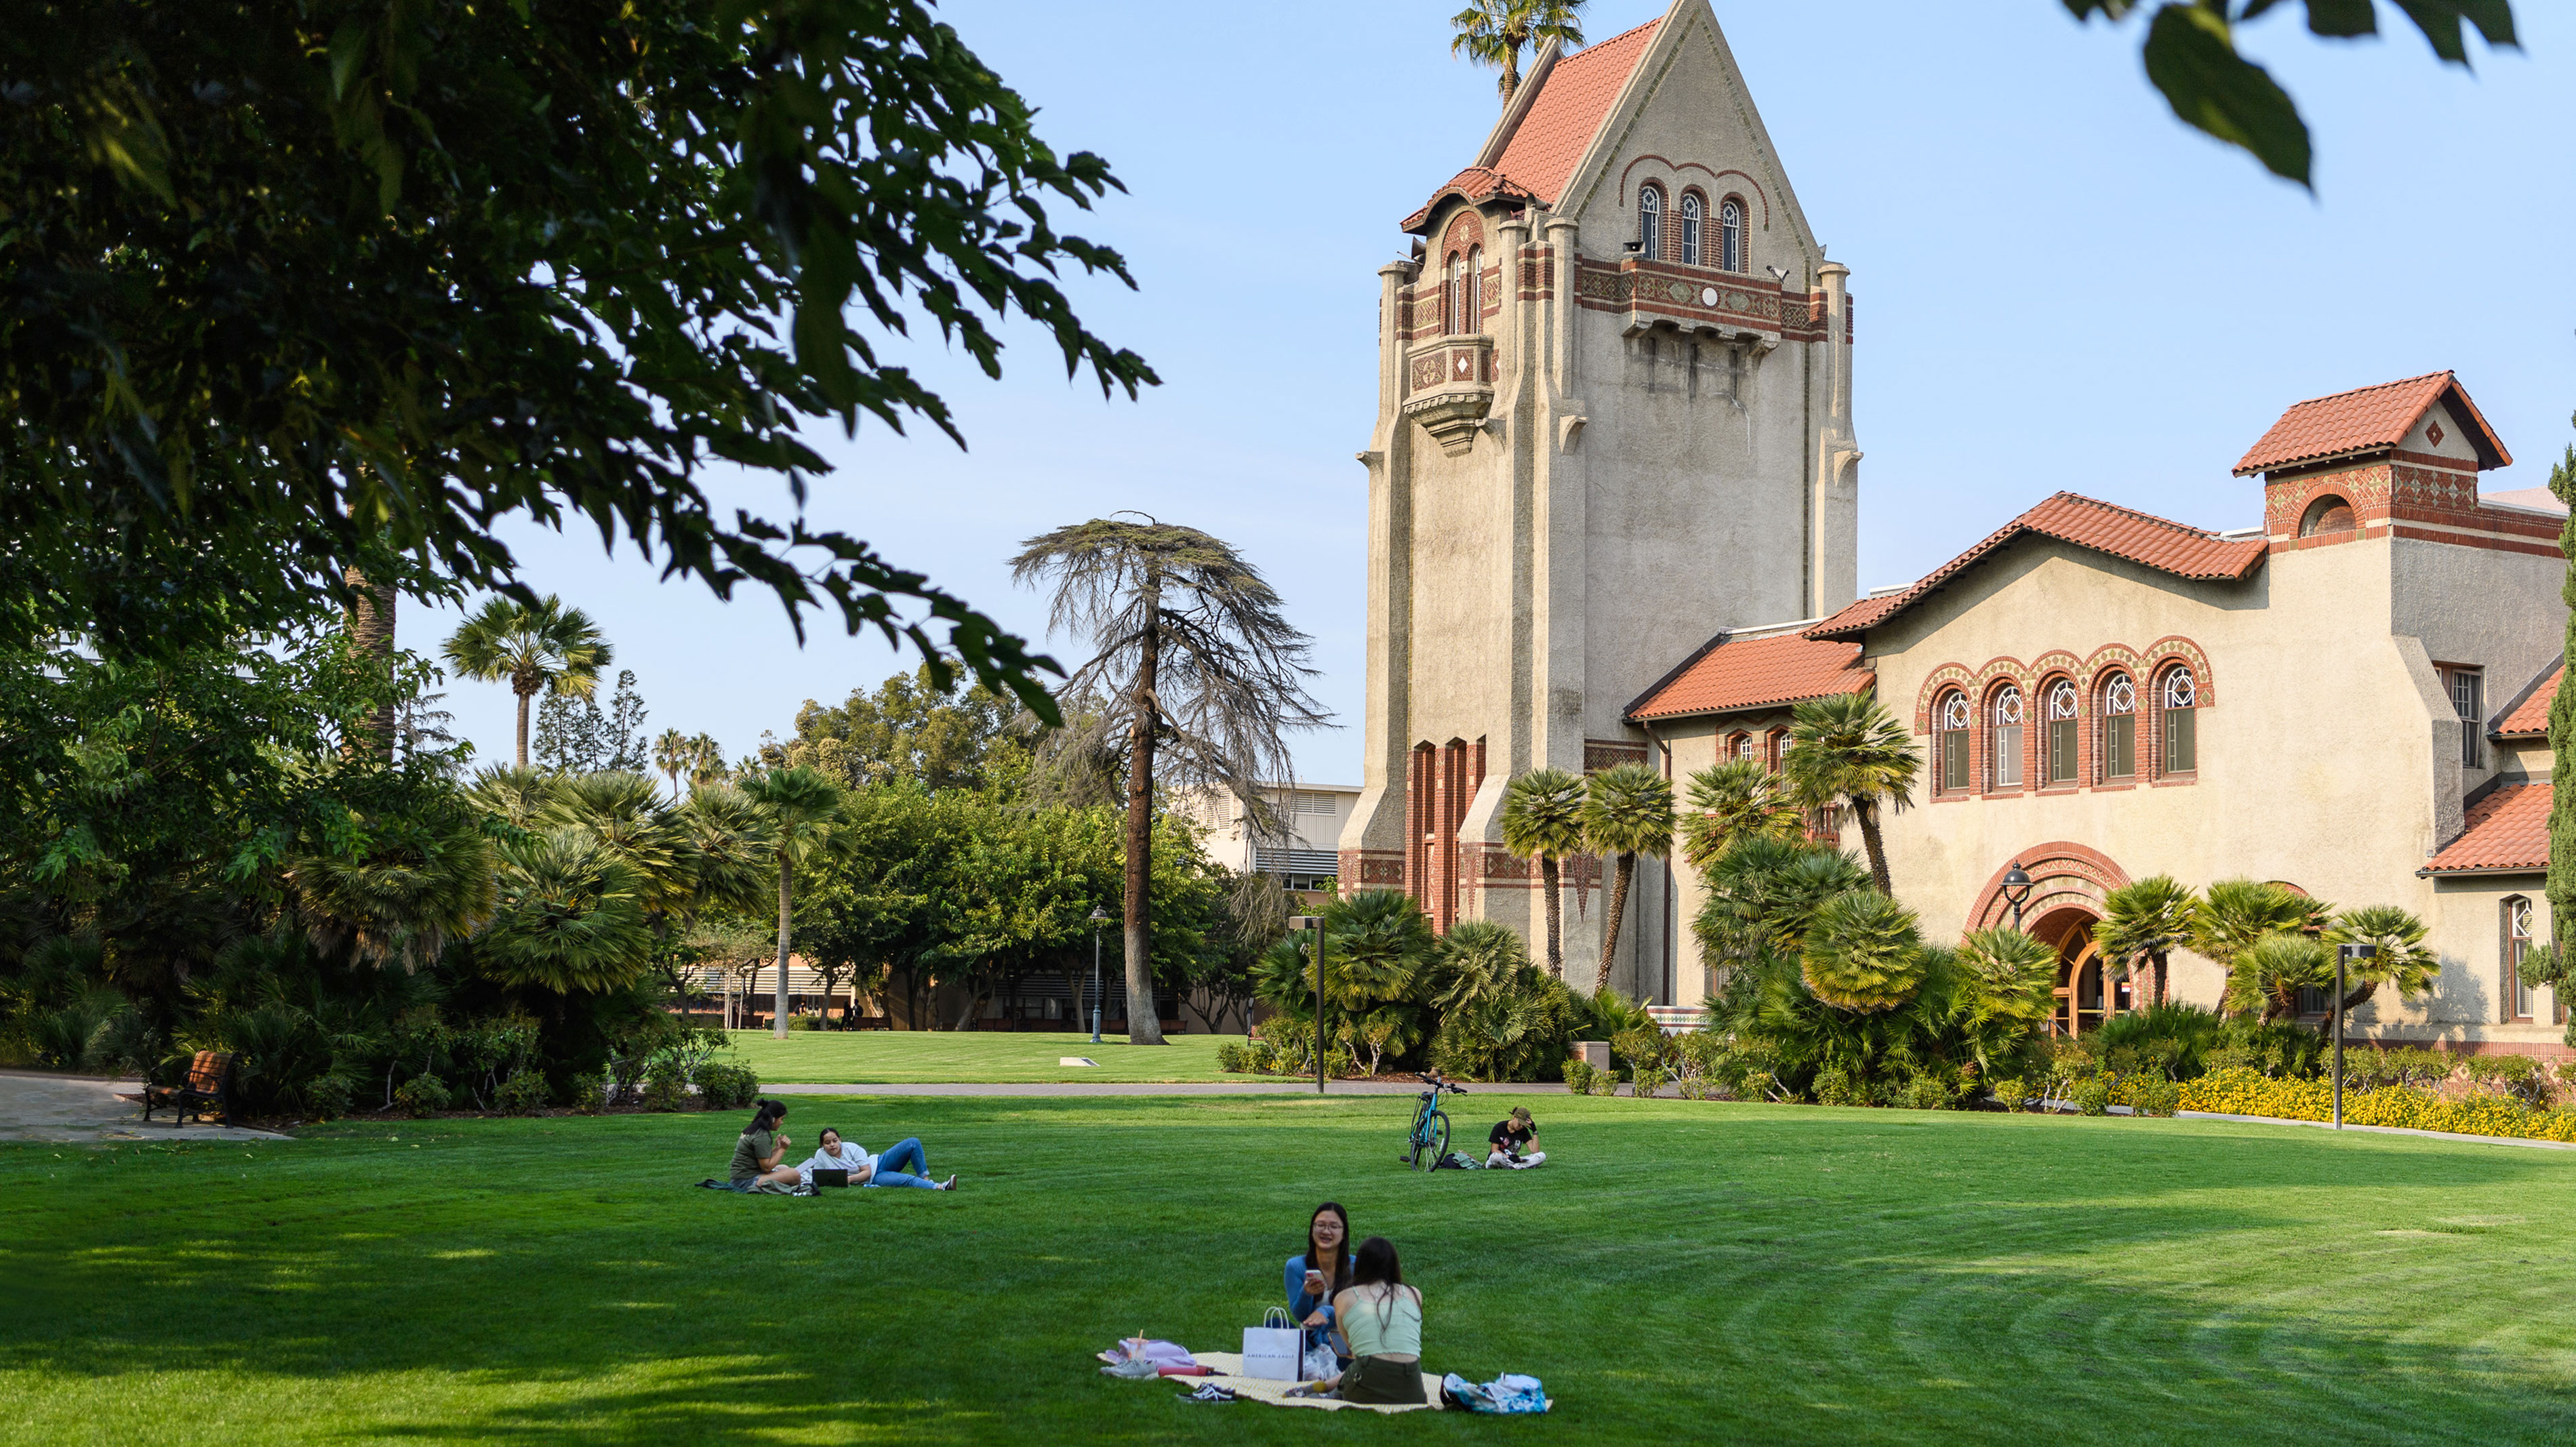 Tower hall on a sunny day with students relaxing on the lawn.